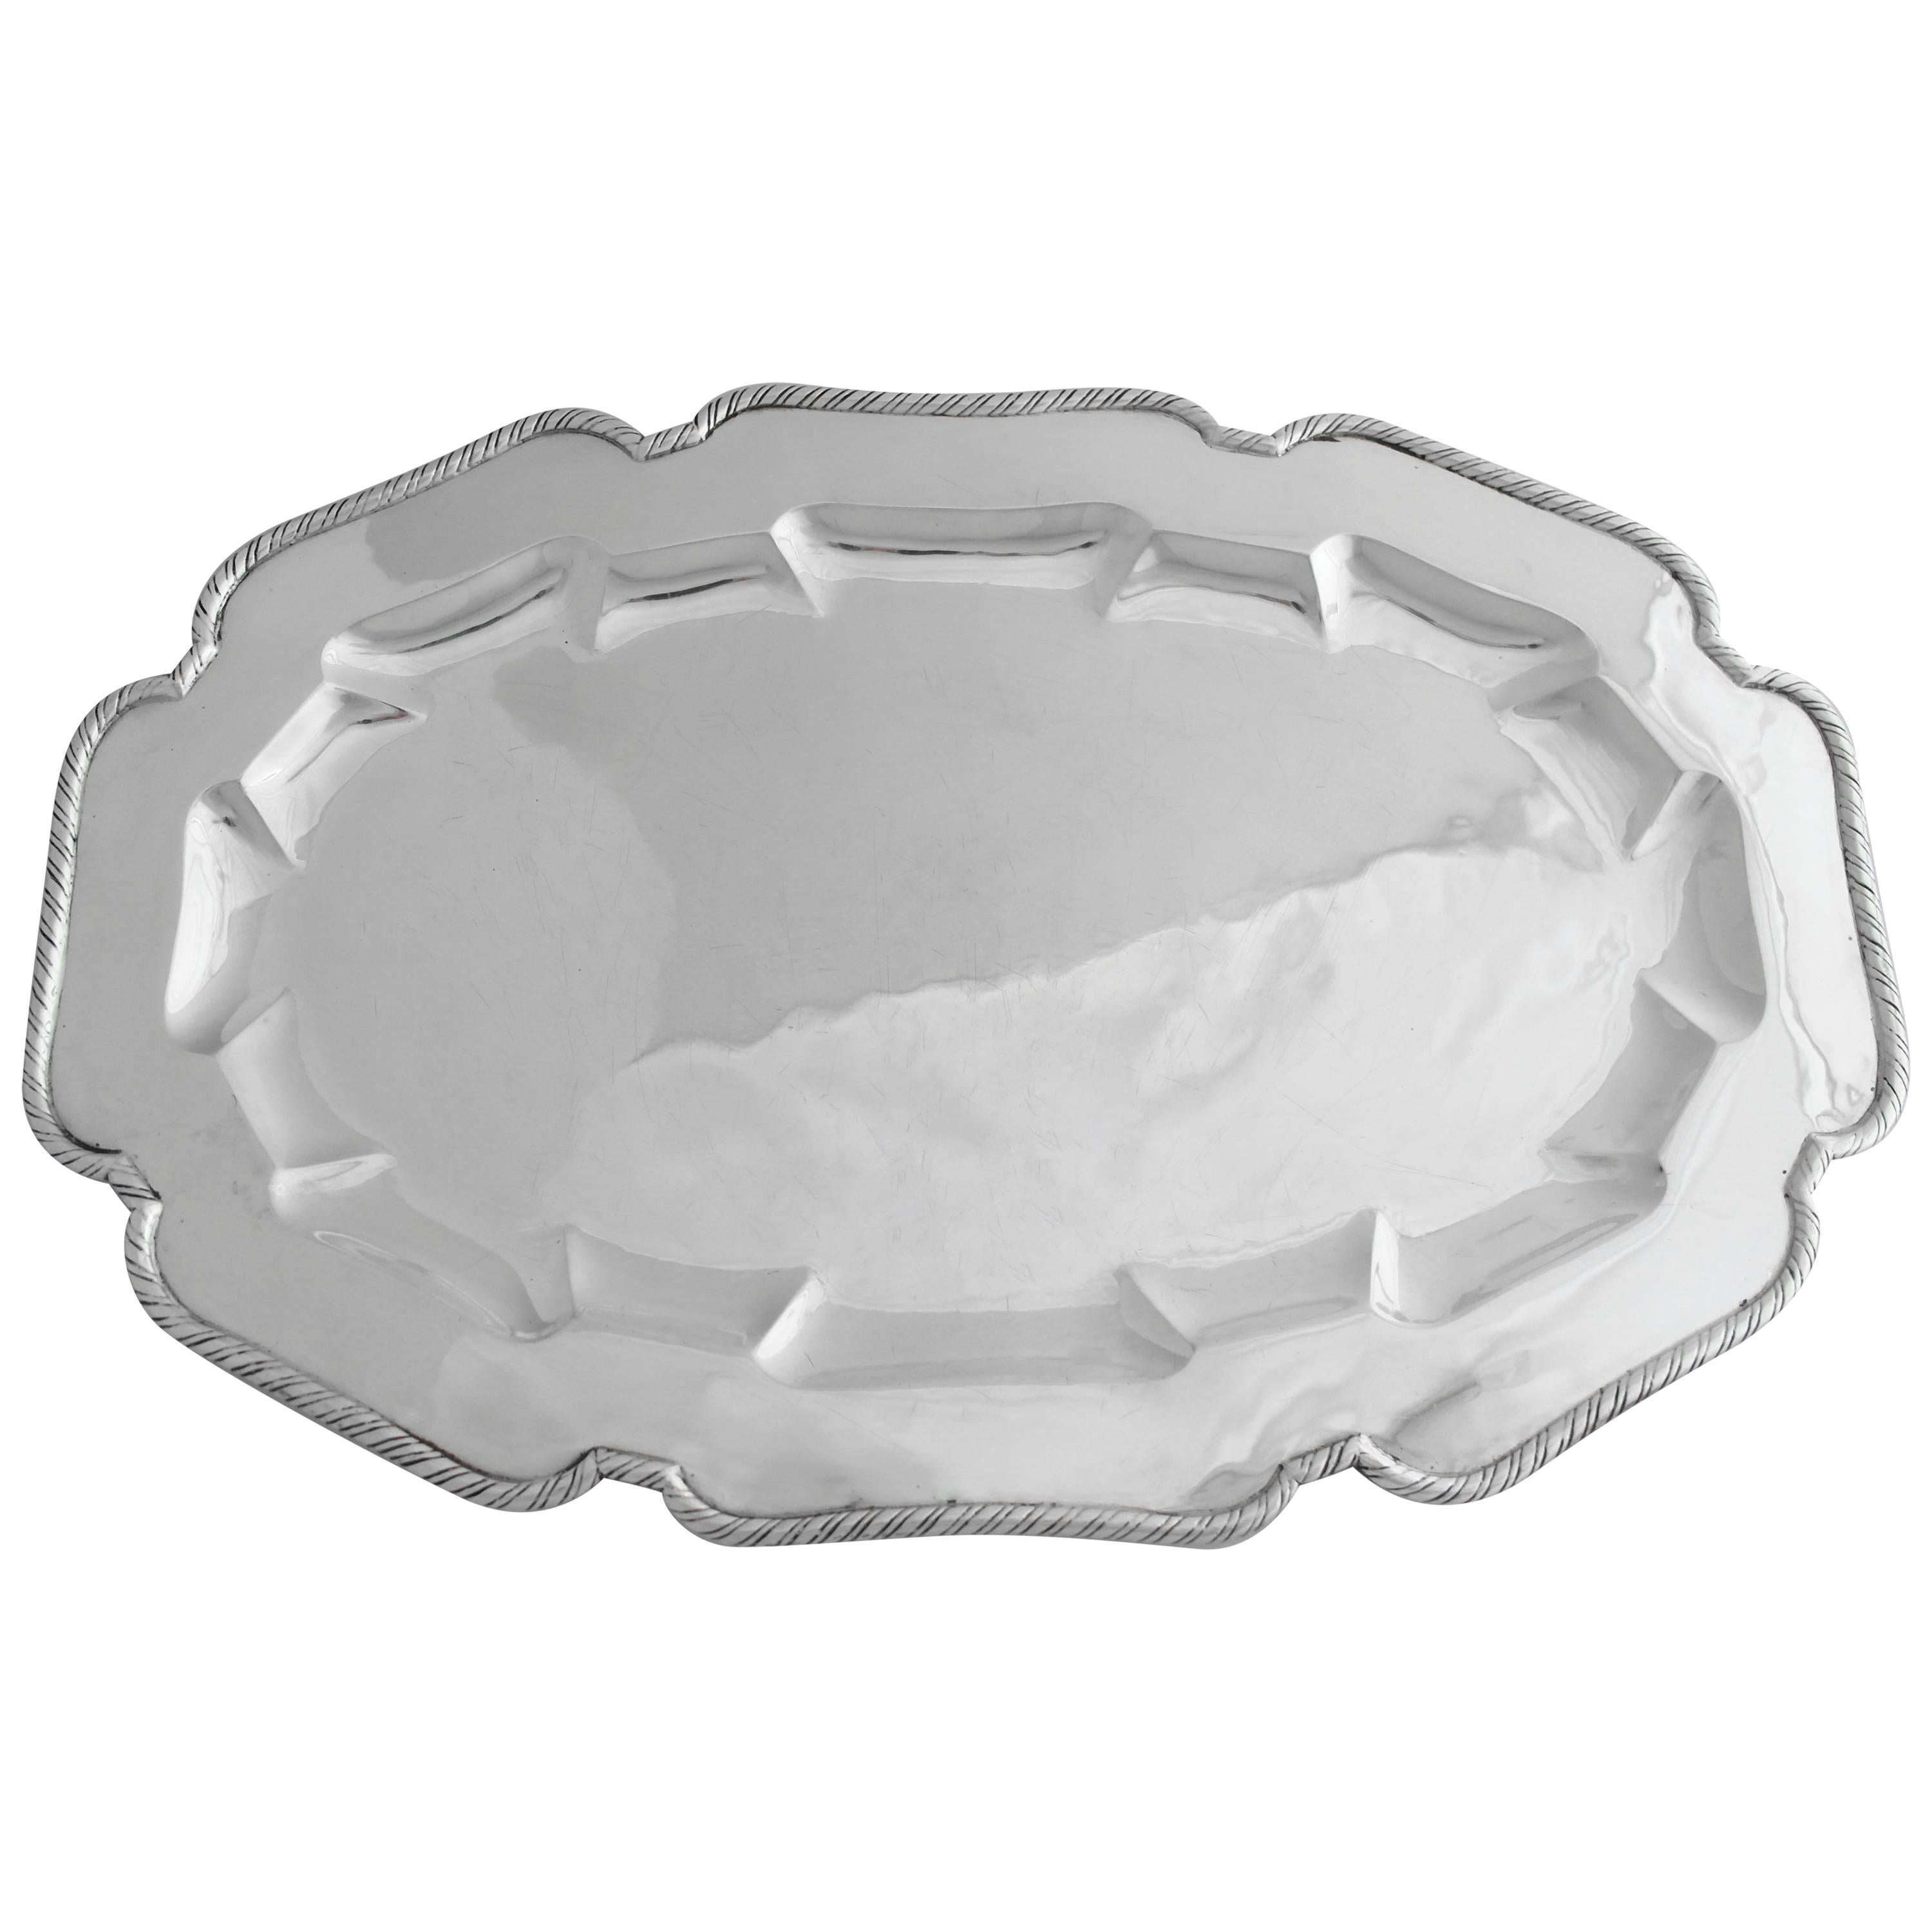 Large William Spratling Large Hand-Wrought Sterling Silver Tray, Patter 1940 For Sale